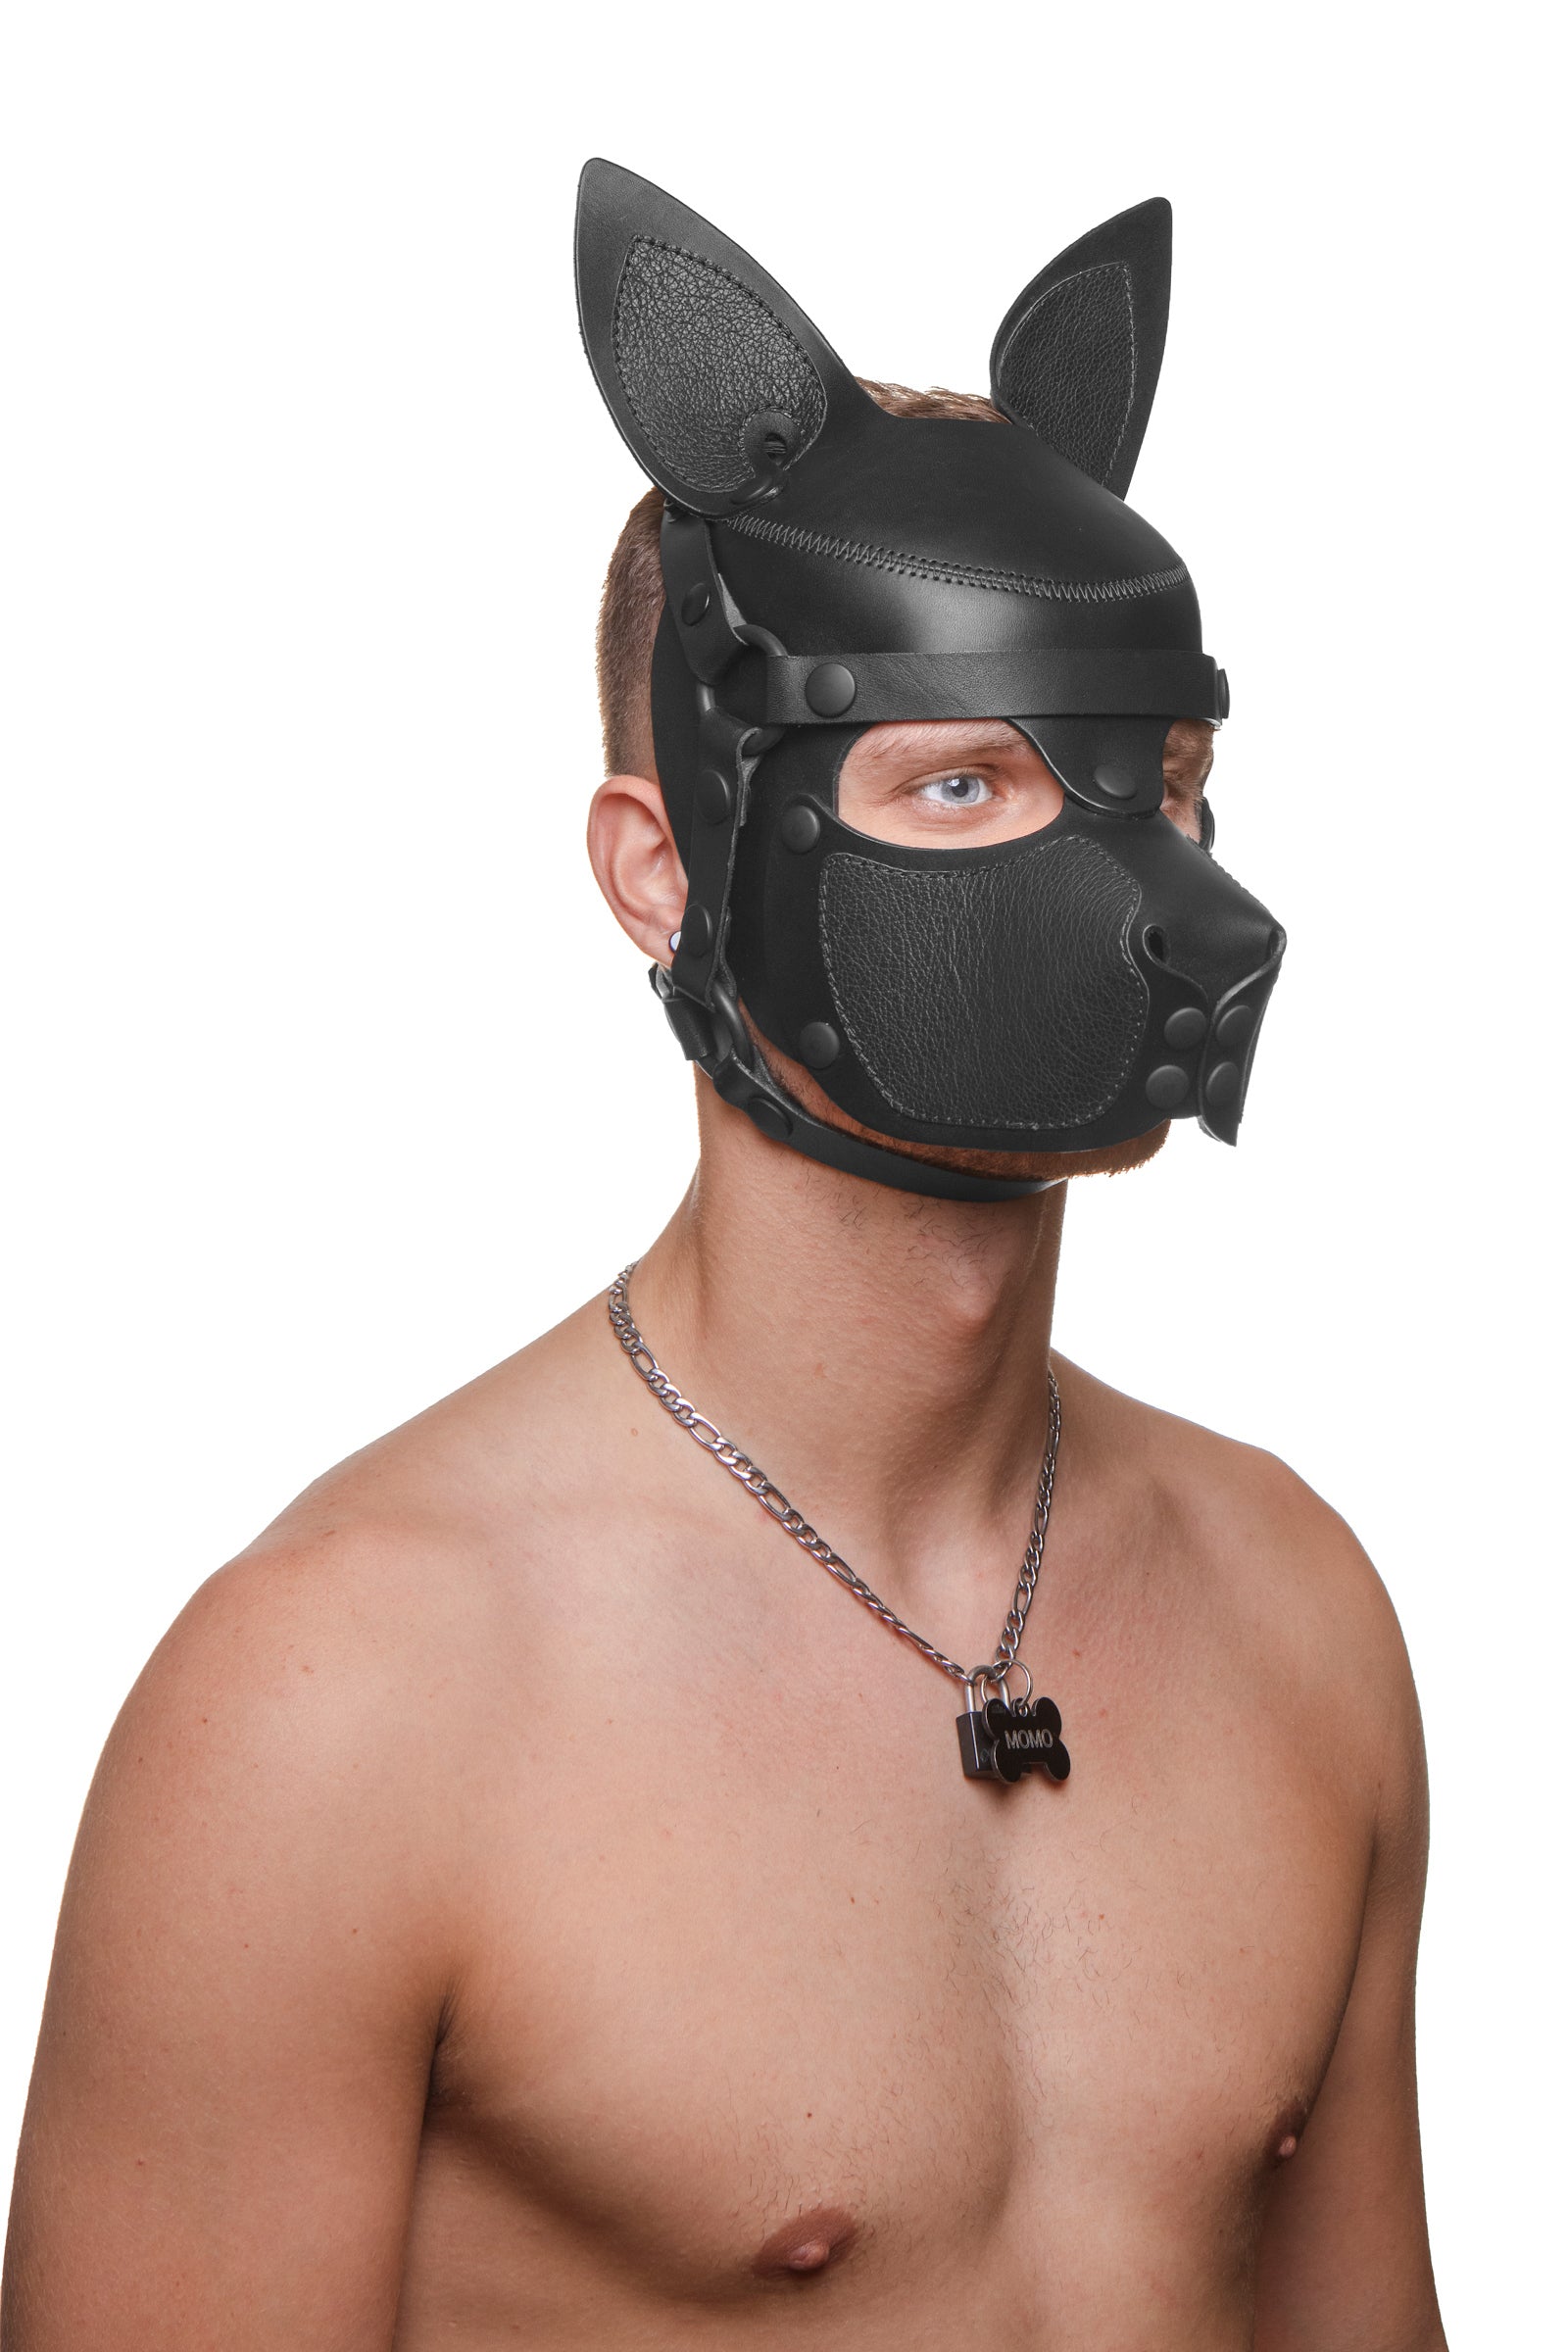 Leather Puppy Mask Hood | Men's Fetish Kink Play Gear ARMY OF MEN